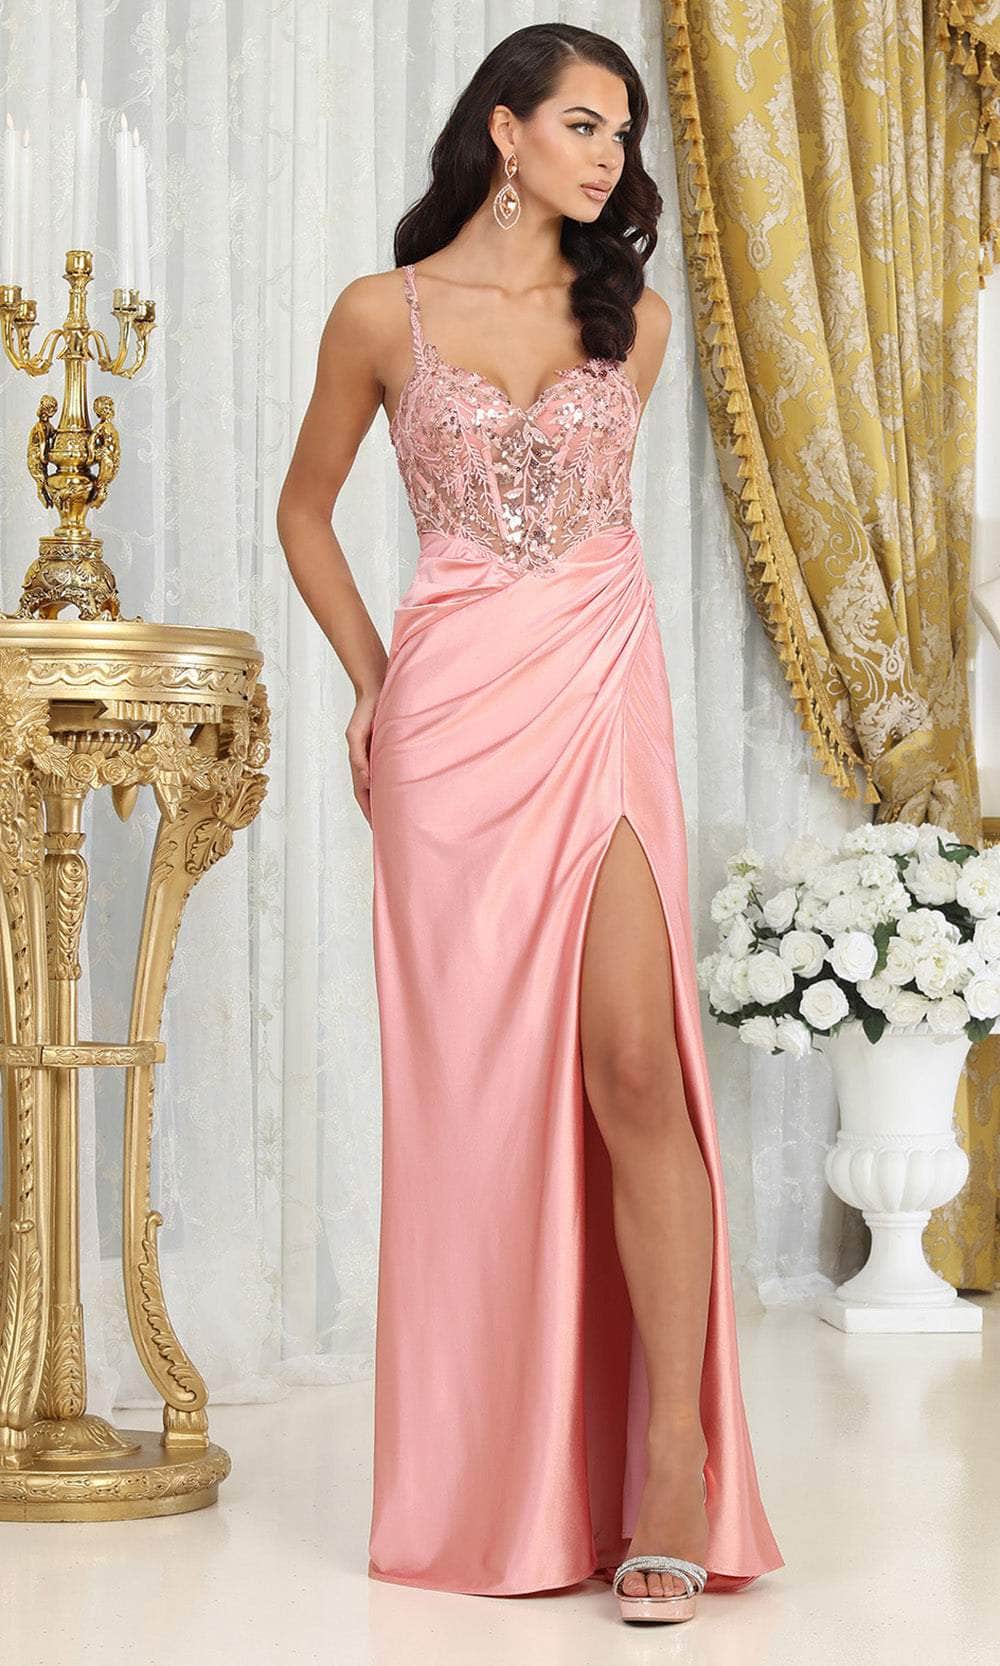 May Queen MQ2006 - Contrast Embellished Prom Dress Prom Dresses 4 / Dusty Rose